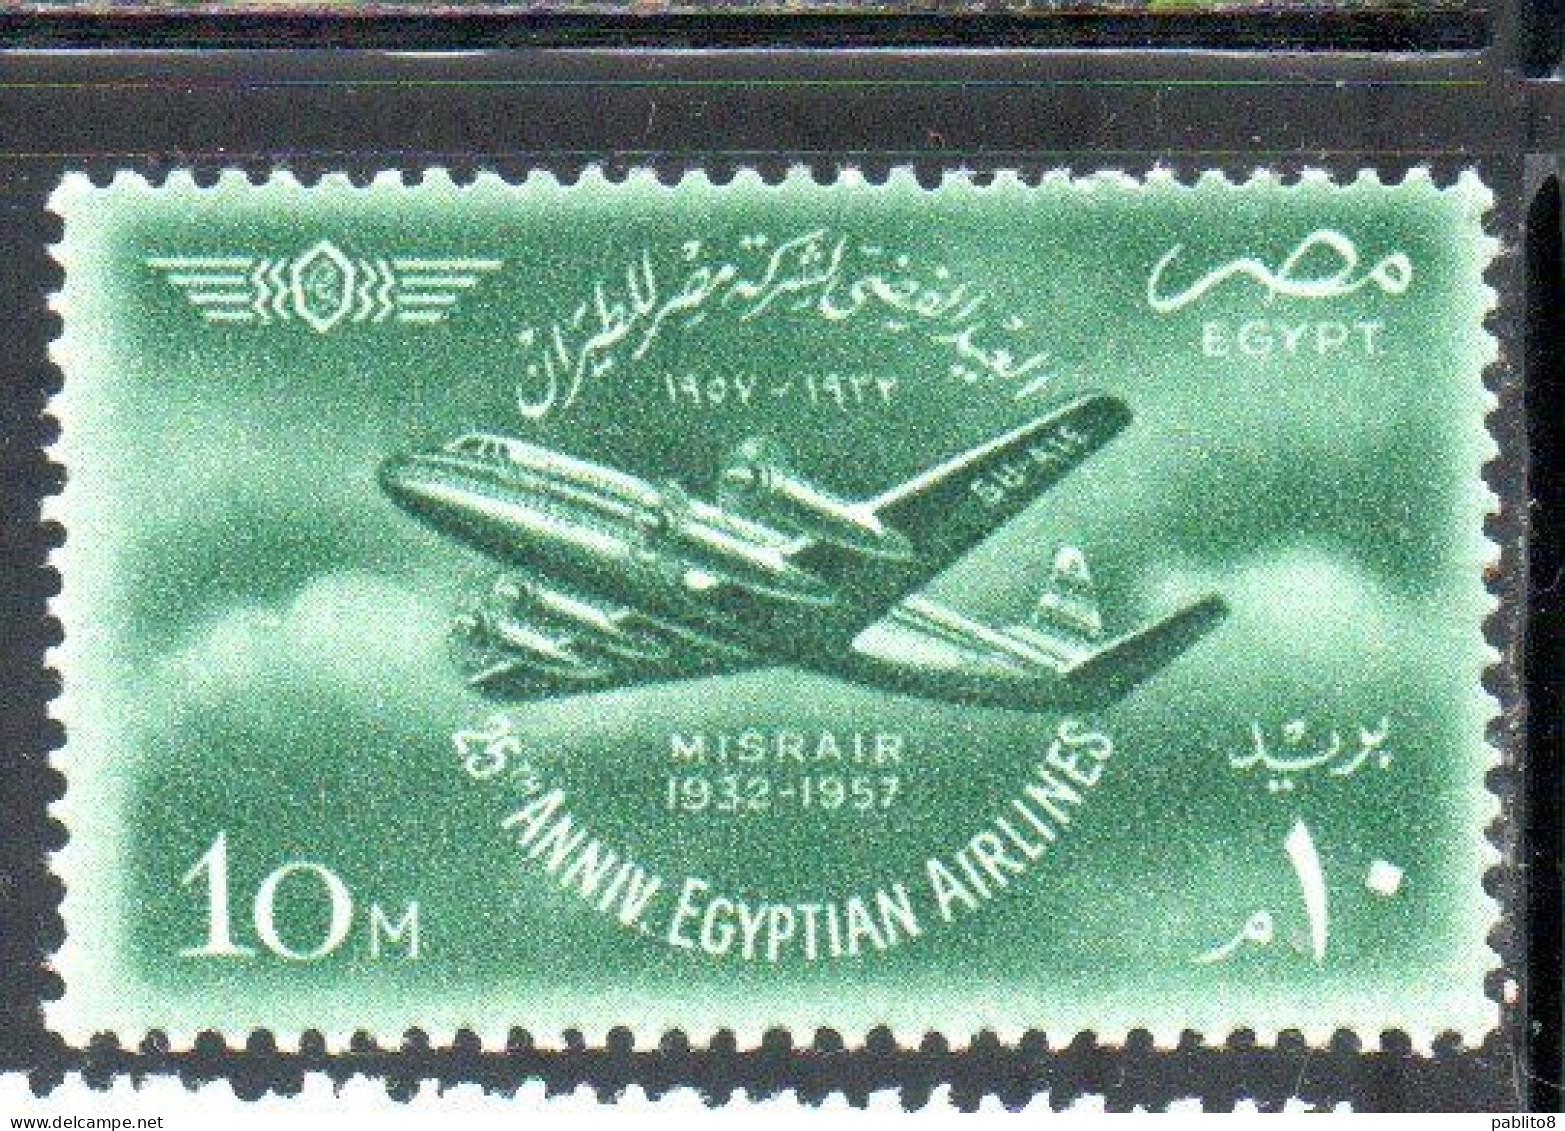 UAR EGYPT EGITTO 1957 EGYPTIAN AIR FORCE AND OF MISRAIR AIRLINE VISCOUNT PLANE 10m MNH - Ungebraucht